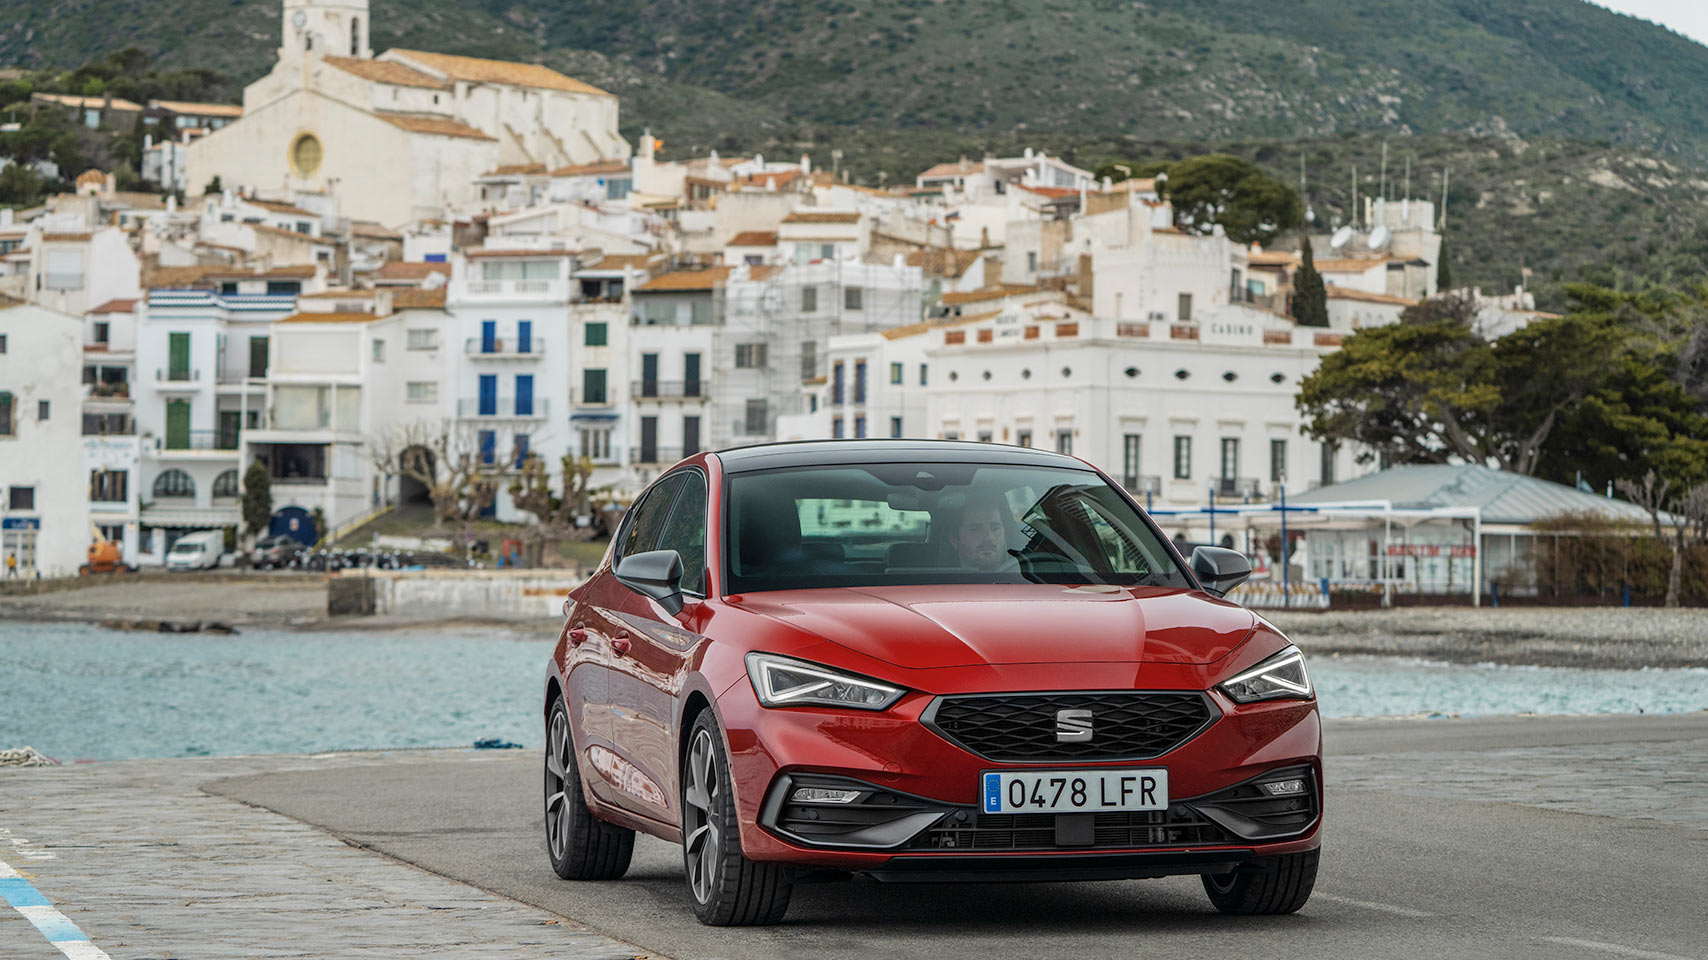 Introducing the all-new SEAT Leon